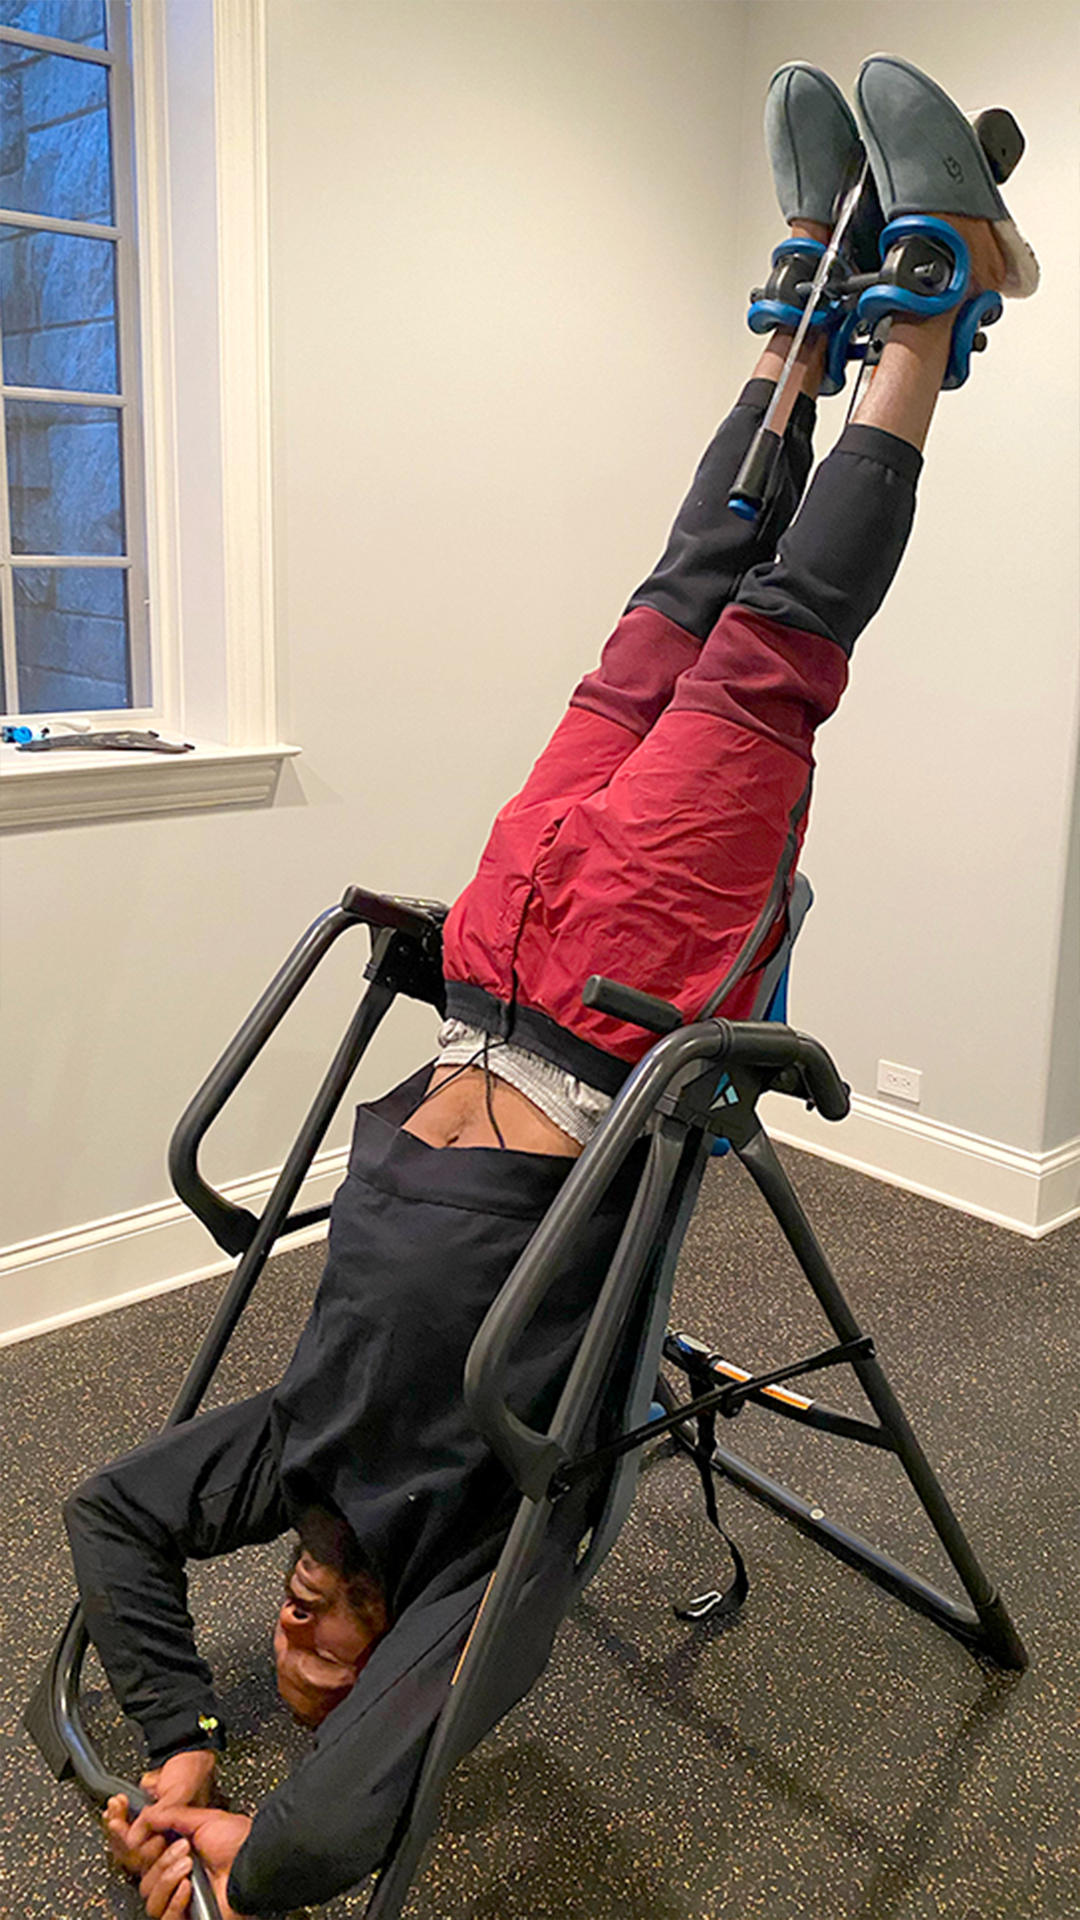 Teeter Move Community - person on inversion table in home